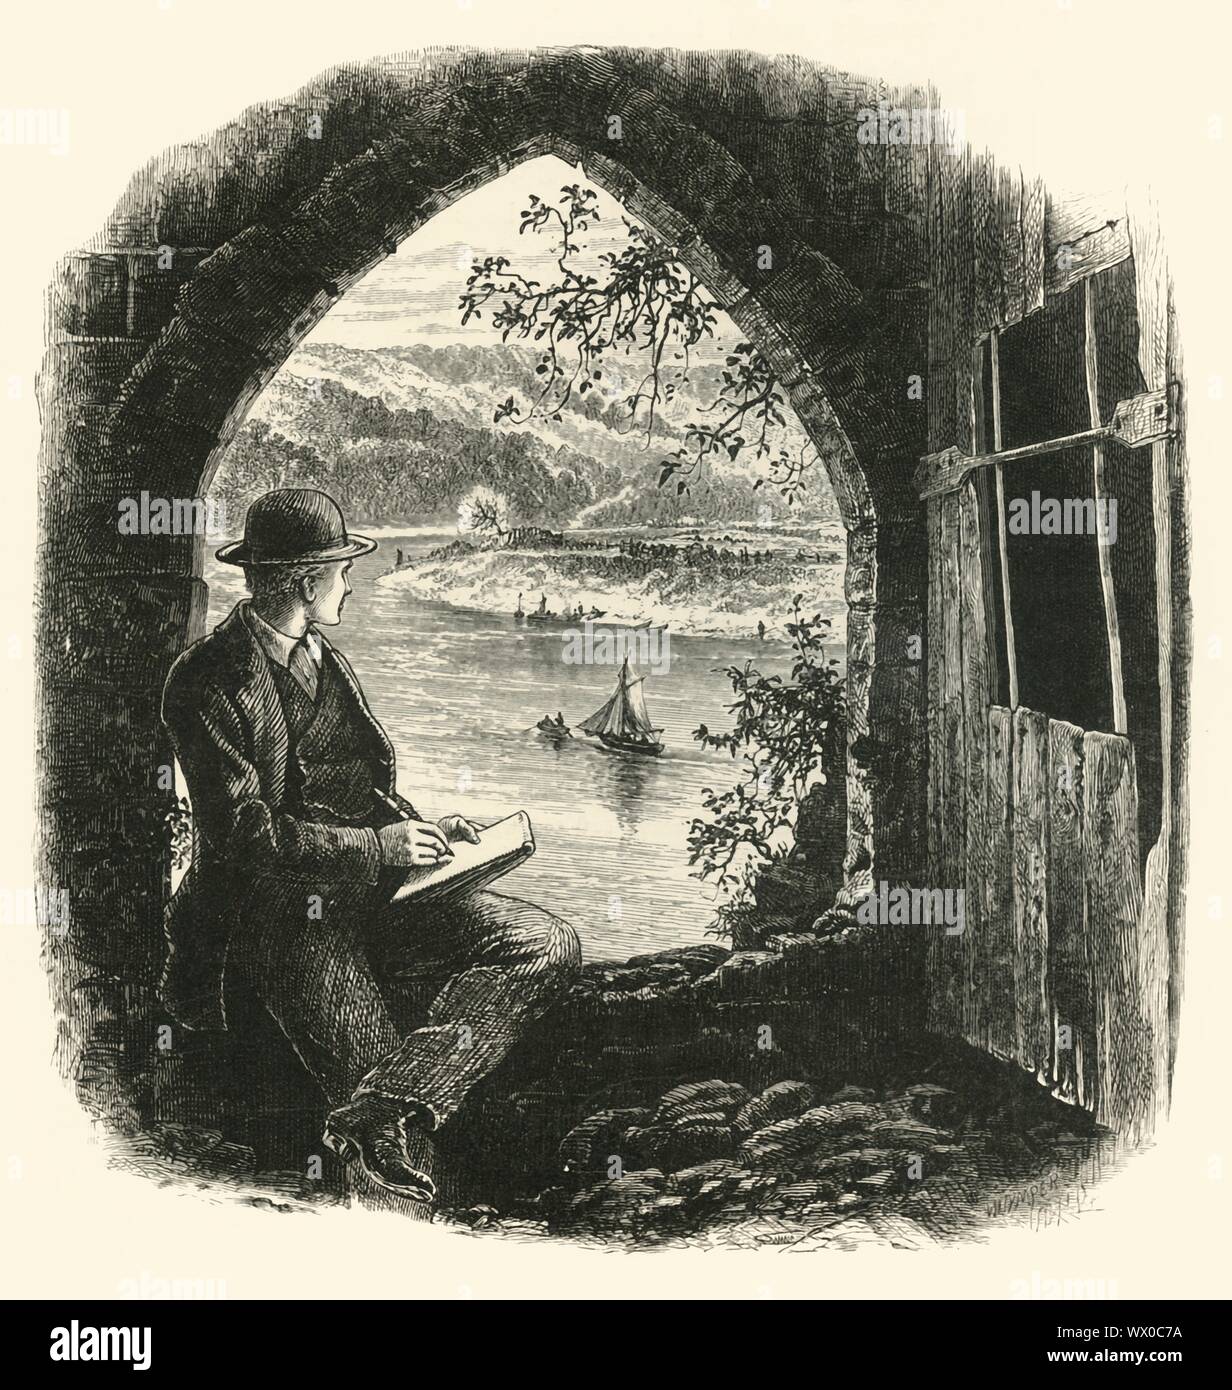 'The Wye, from Chepstow Castle, 1870s. A man sketching the River Wye in Monmouthshire, Wales. Chepstow Castle is the oldest surviving post-Roman stone fortification in Britain. From &quot;Picturesque Europe. A Delination by Pen &amp; Pencil of the Natural Features &amp; the Picturesque &amp; Historical Places of Great Britain &amp; the Continent.&quot;. [D. Appleton &amp; Co, New York, c1875-1878] Stock Photo